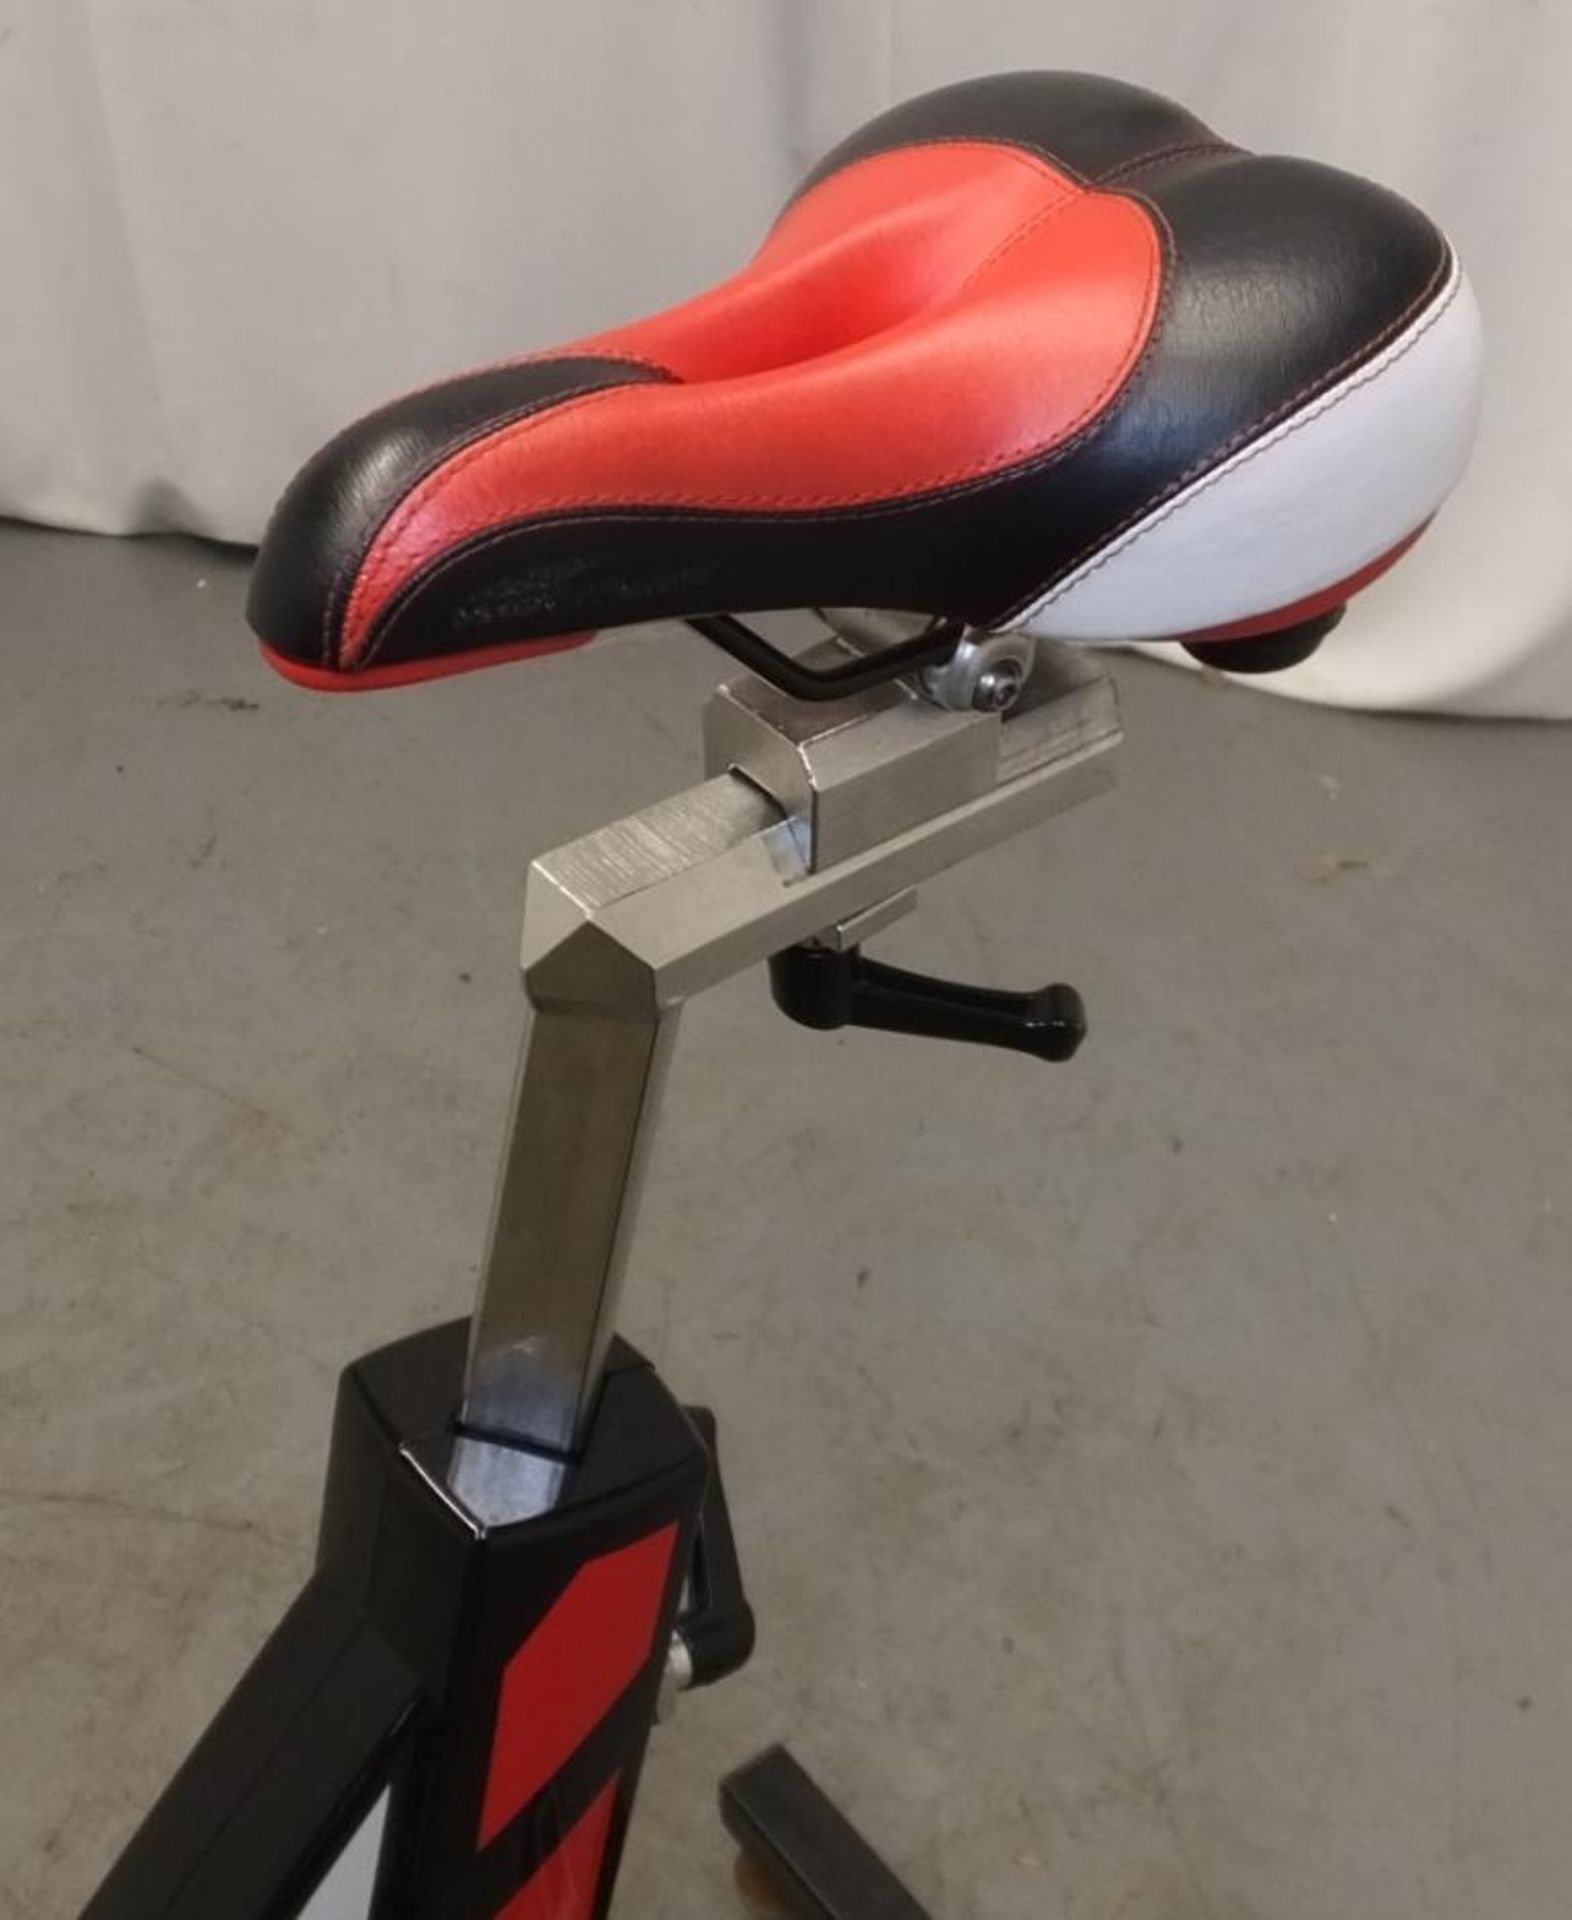 Wattbike Training Exercise Bike - console powers up - functionality untested - damage to cup holder - Image 3 of 6